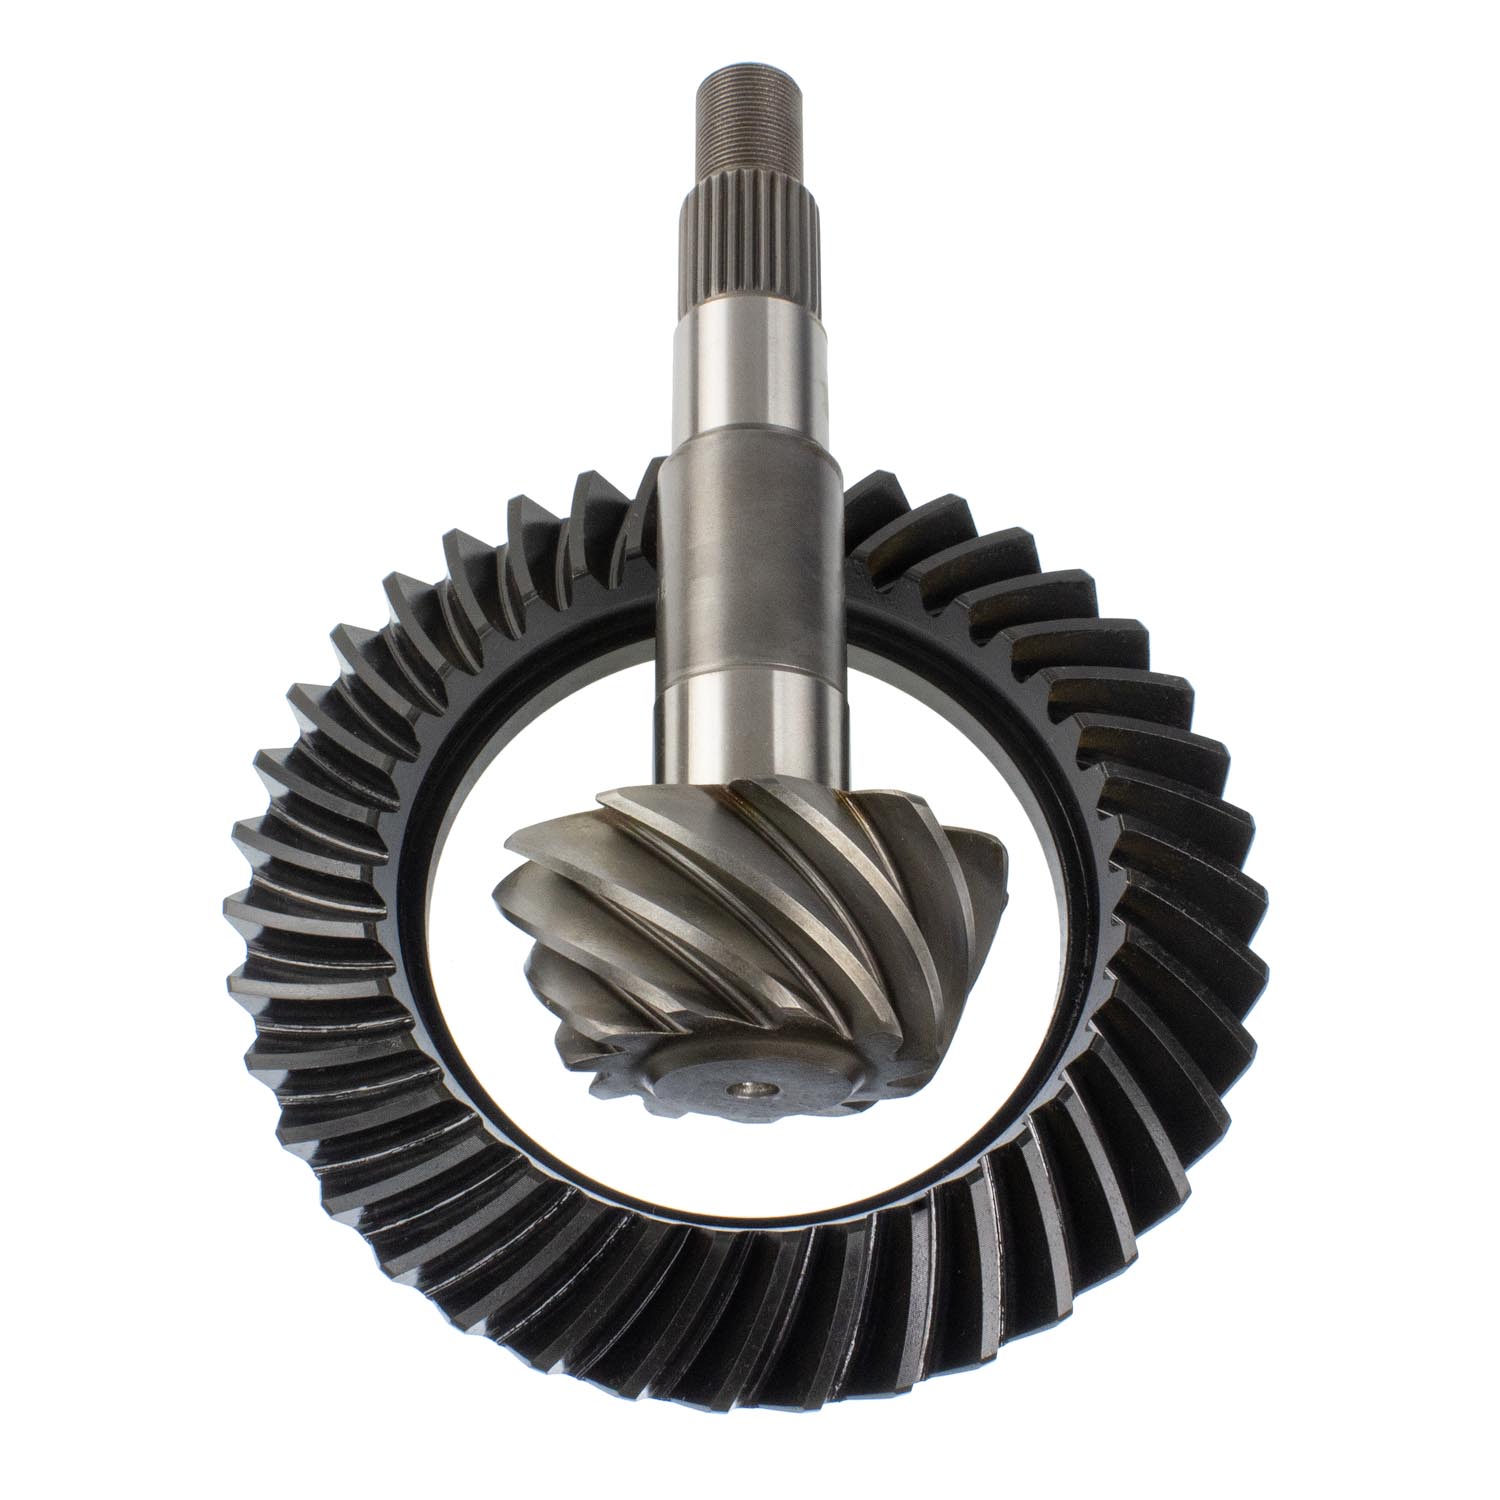 Motive Gear F888355 8.8 Rear Ring and Pinion for Ford 3.55 Ratio